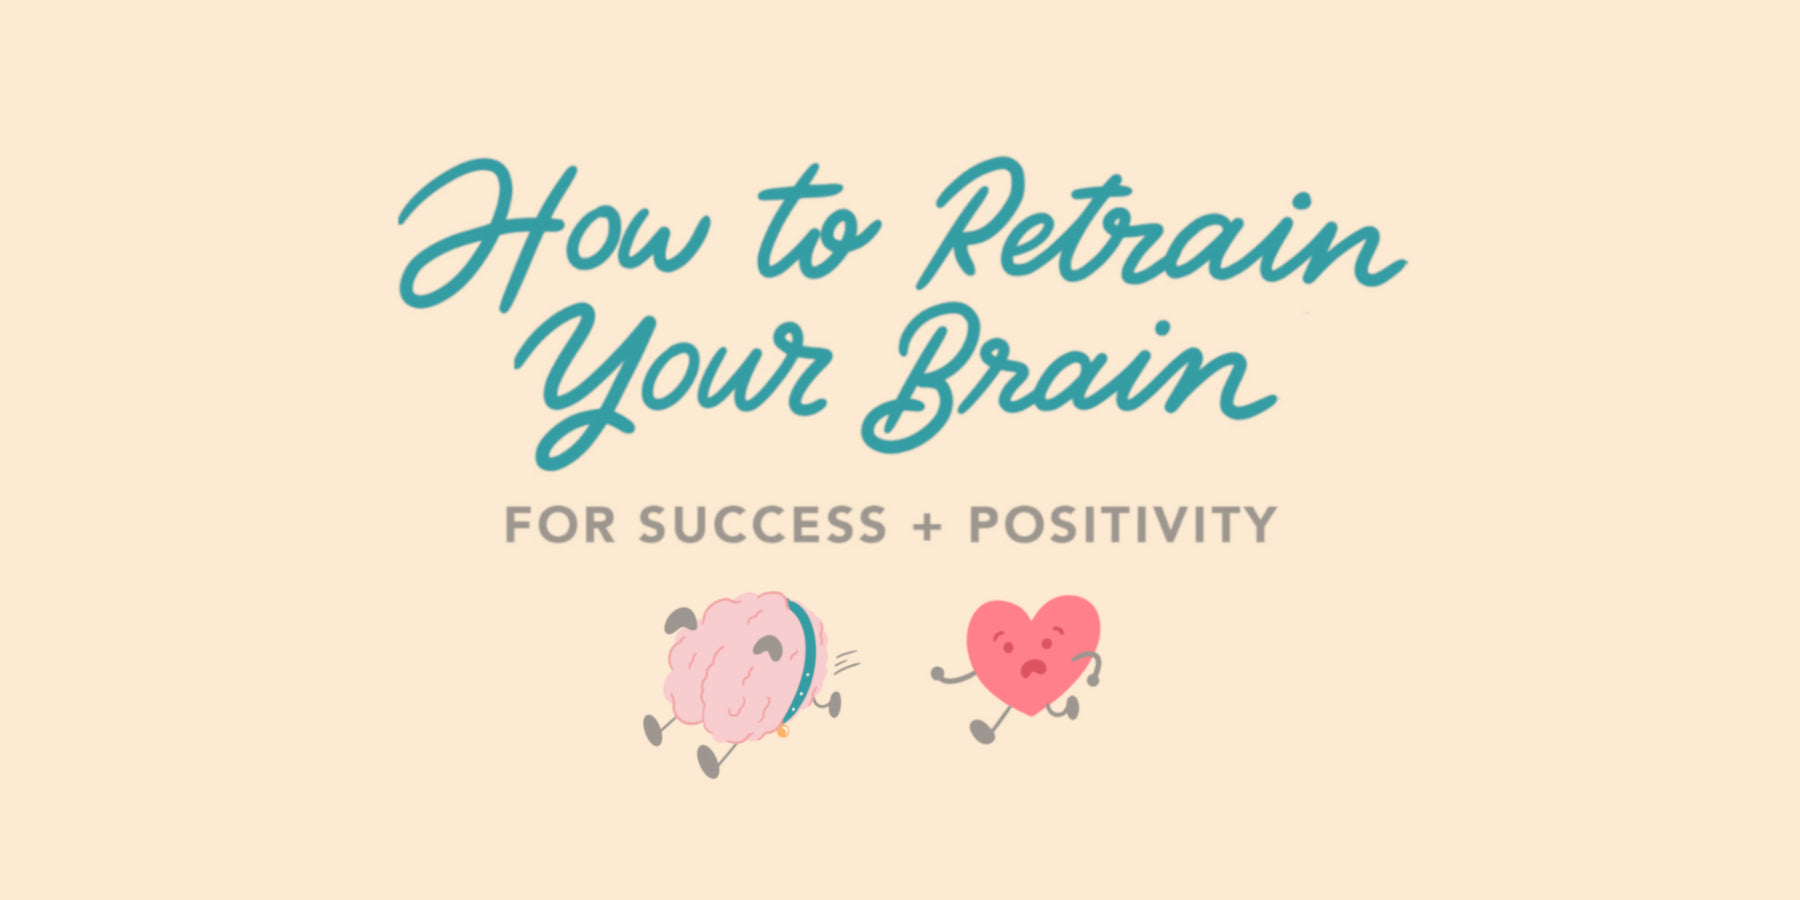 How to Curb Negative Thinking and Retrain Your Brain